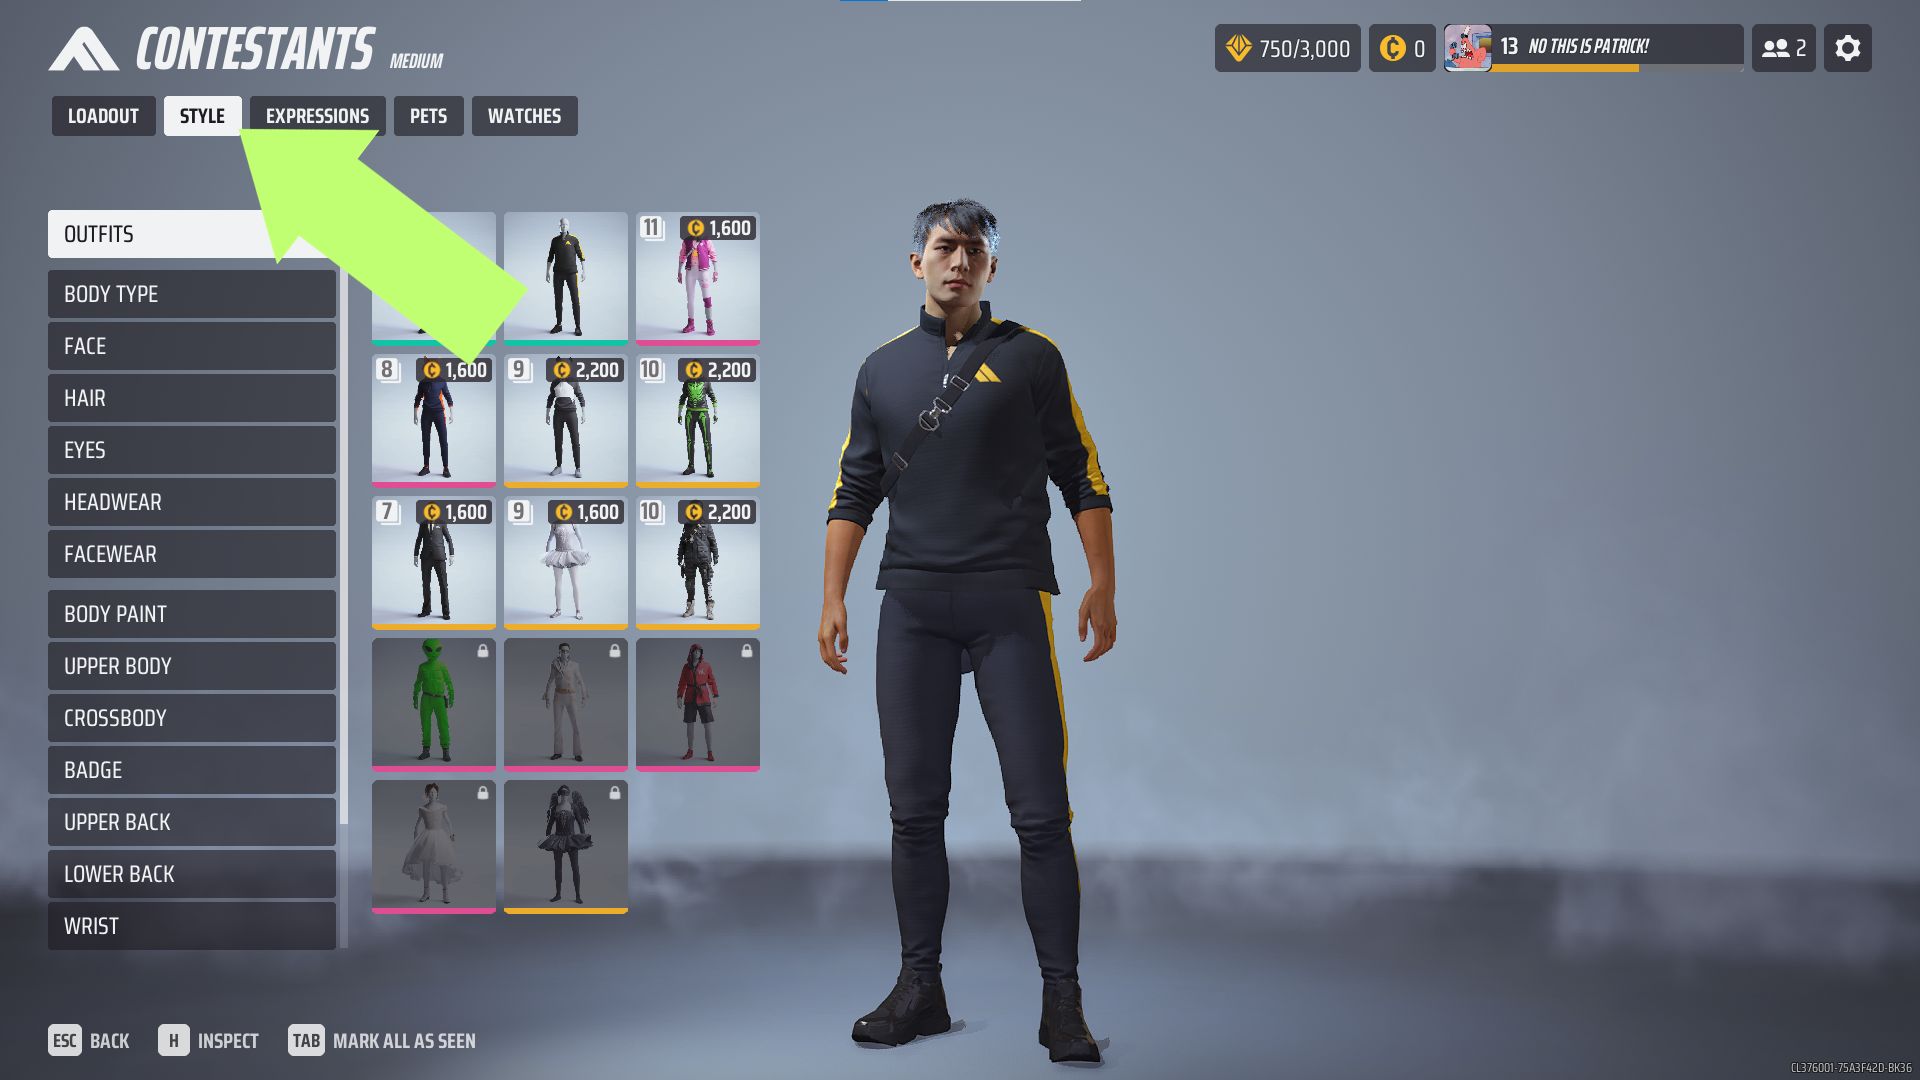 A screenshot of the Style tab in the Contestants menu. 